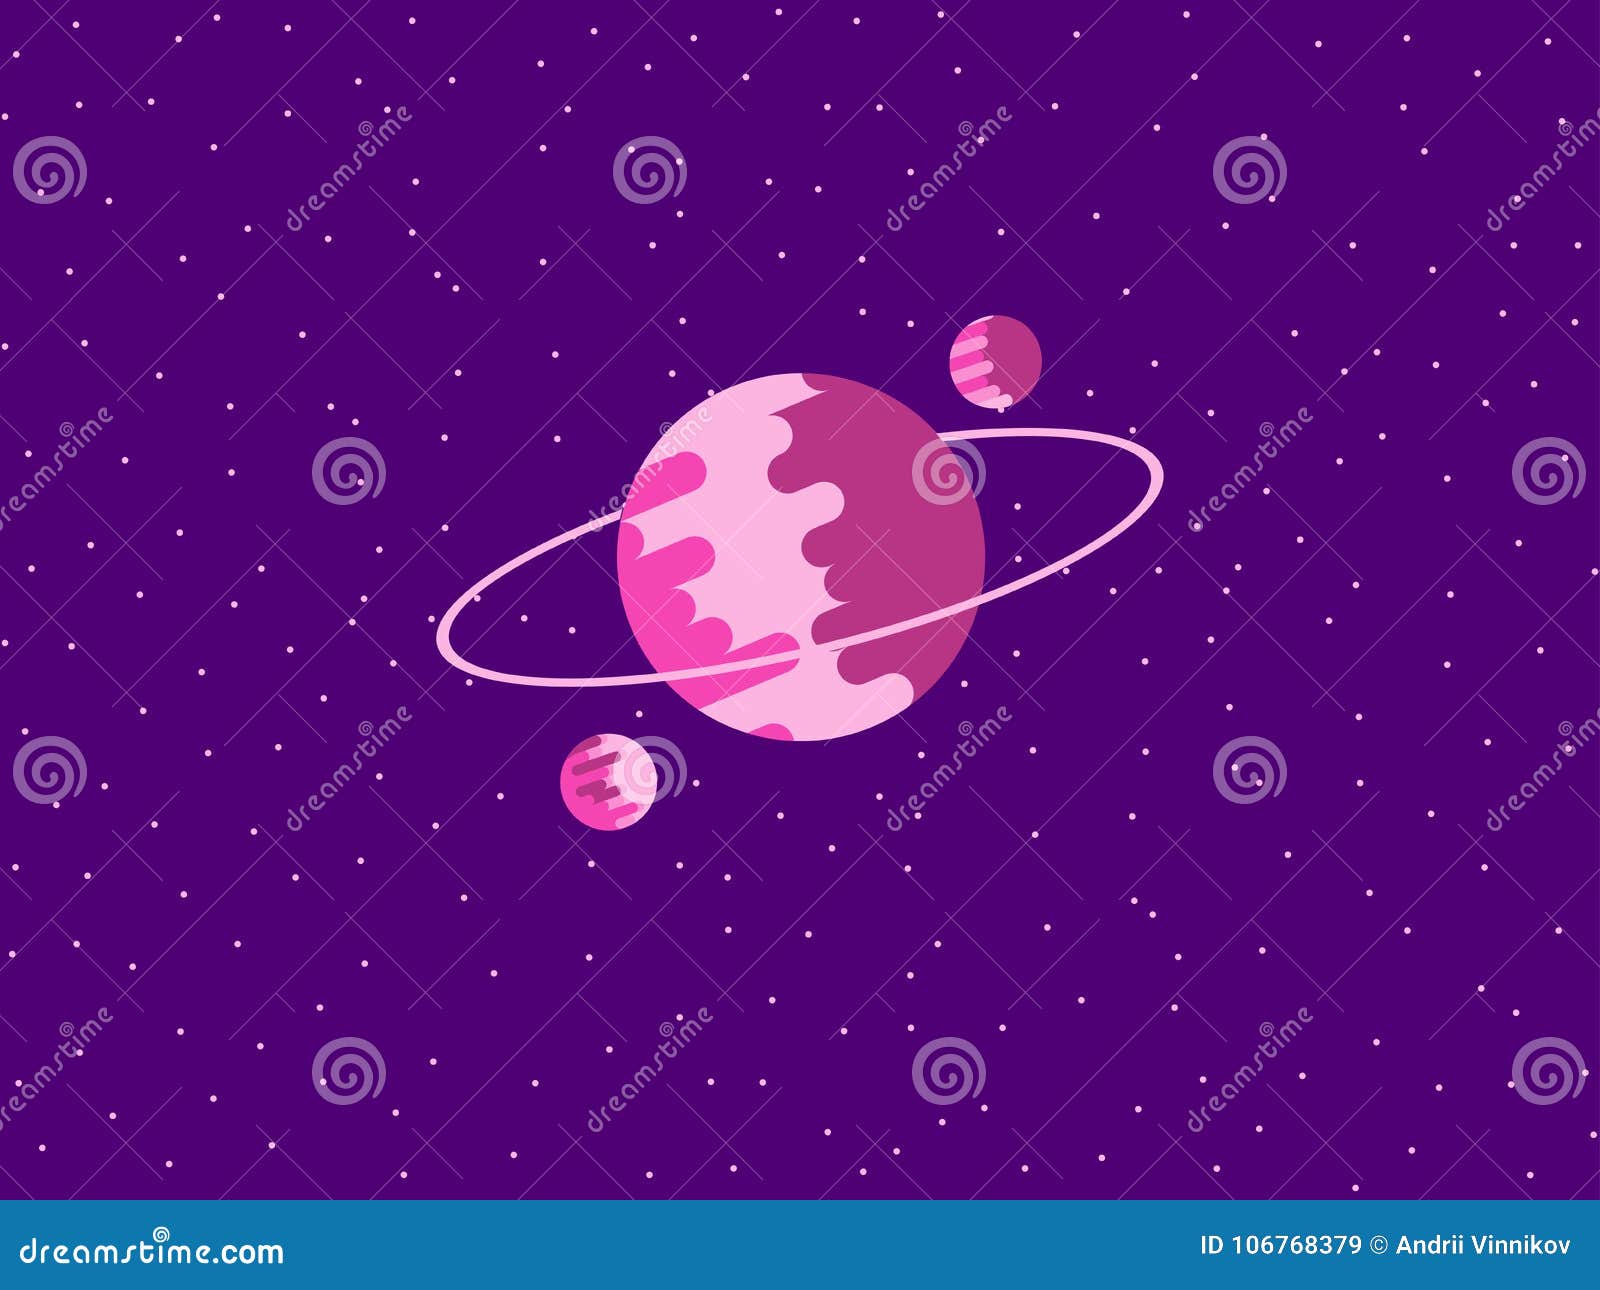 Saturn Flat Style. Planet Of The Solar System. Vector ...